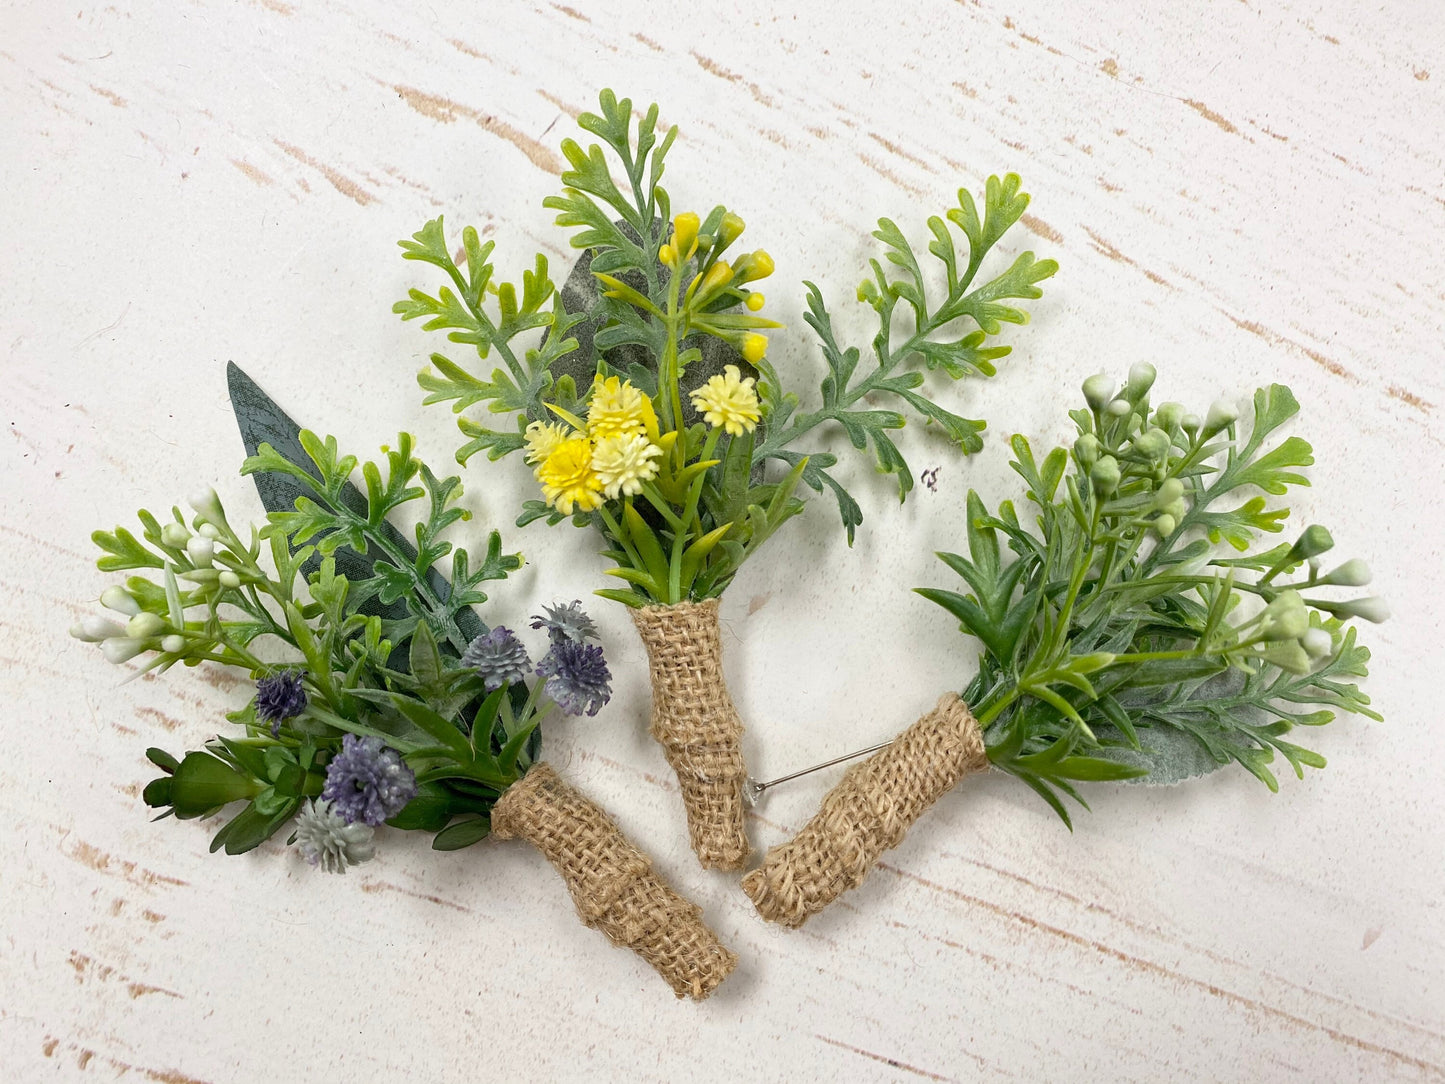 Rustic Artificial Boutonniere - Baby's Breath, Greenery & Succulents with Burlap Wrap